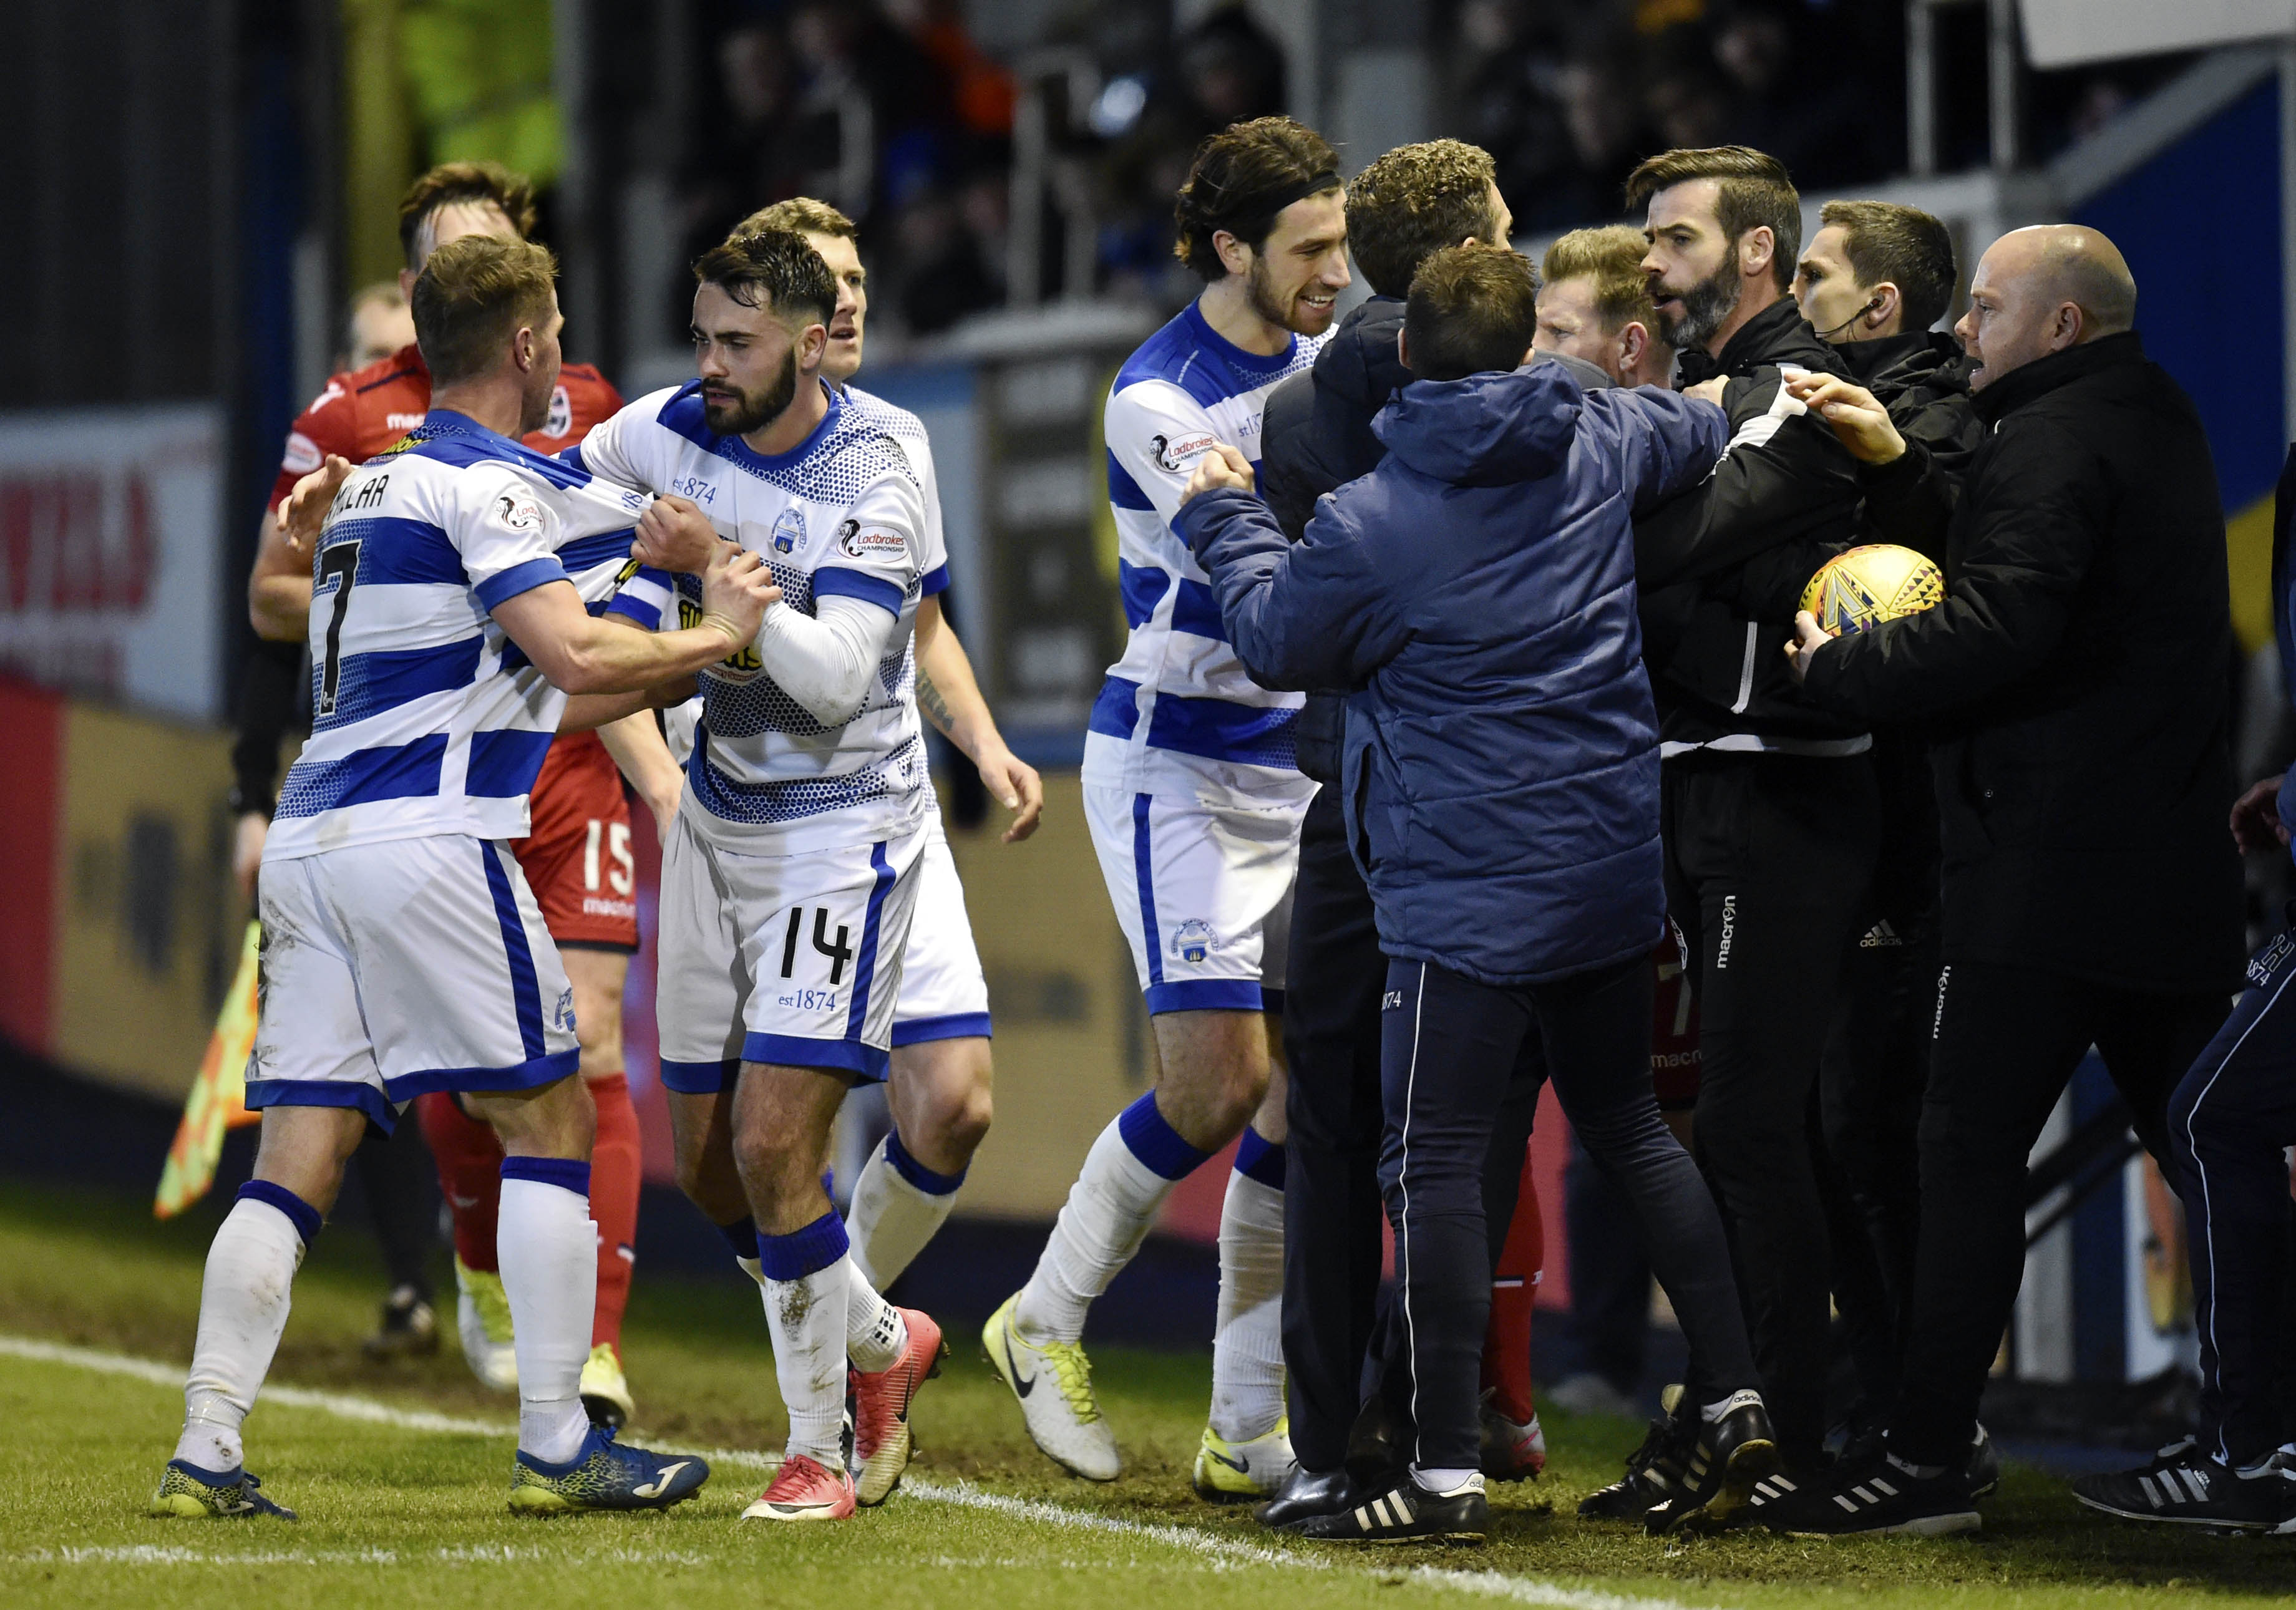 Stuart Kettlewell was involved in a touchline scuffle against Morton.